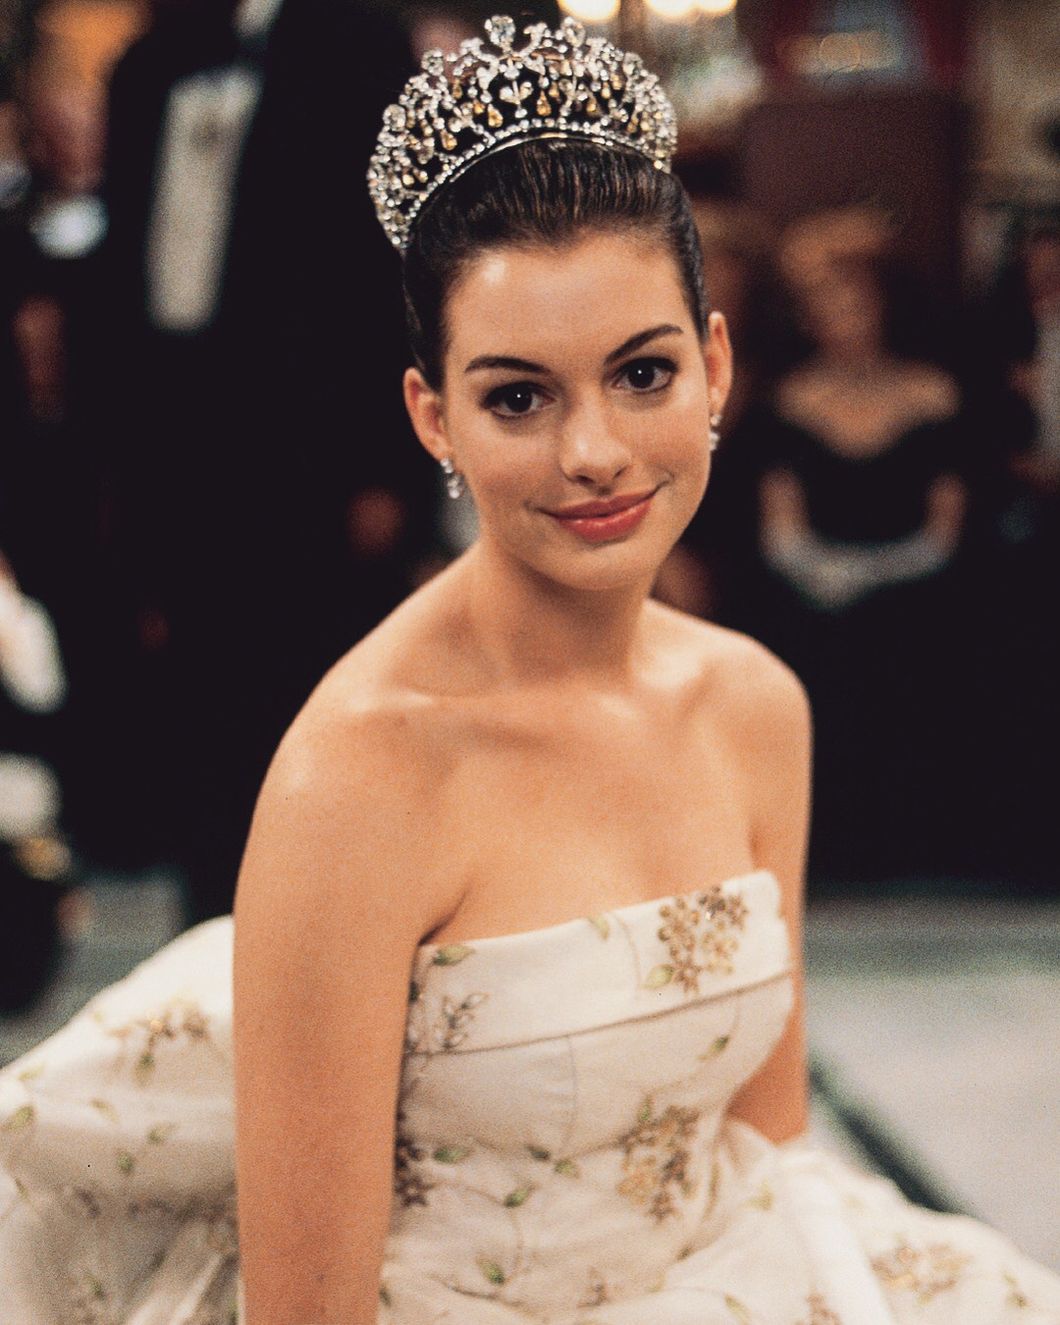 'The Princess Diaries' Has All The Girlpower Vibes You've Been Craving